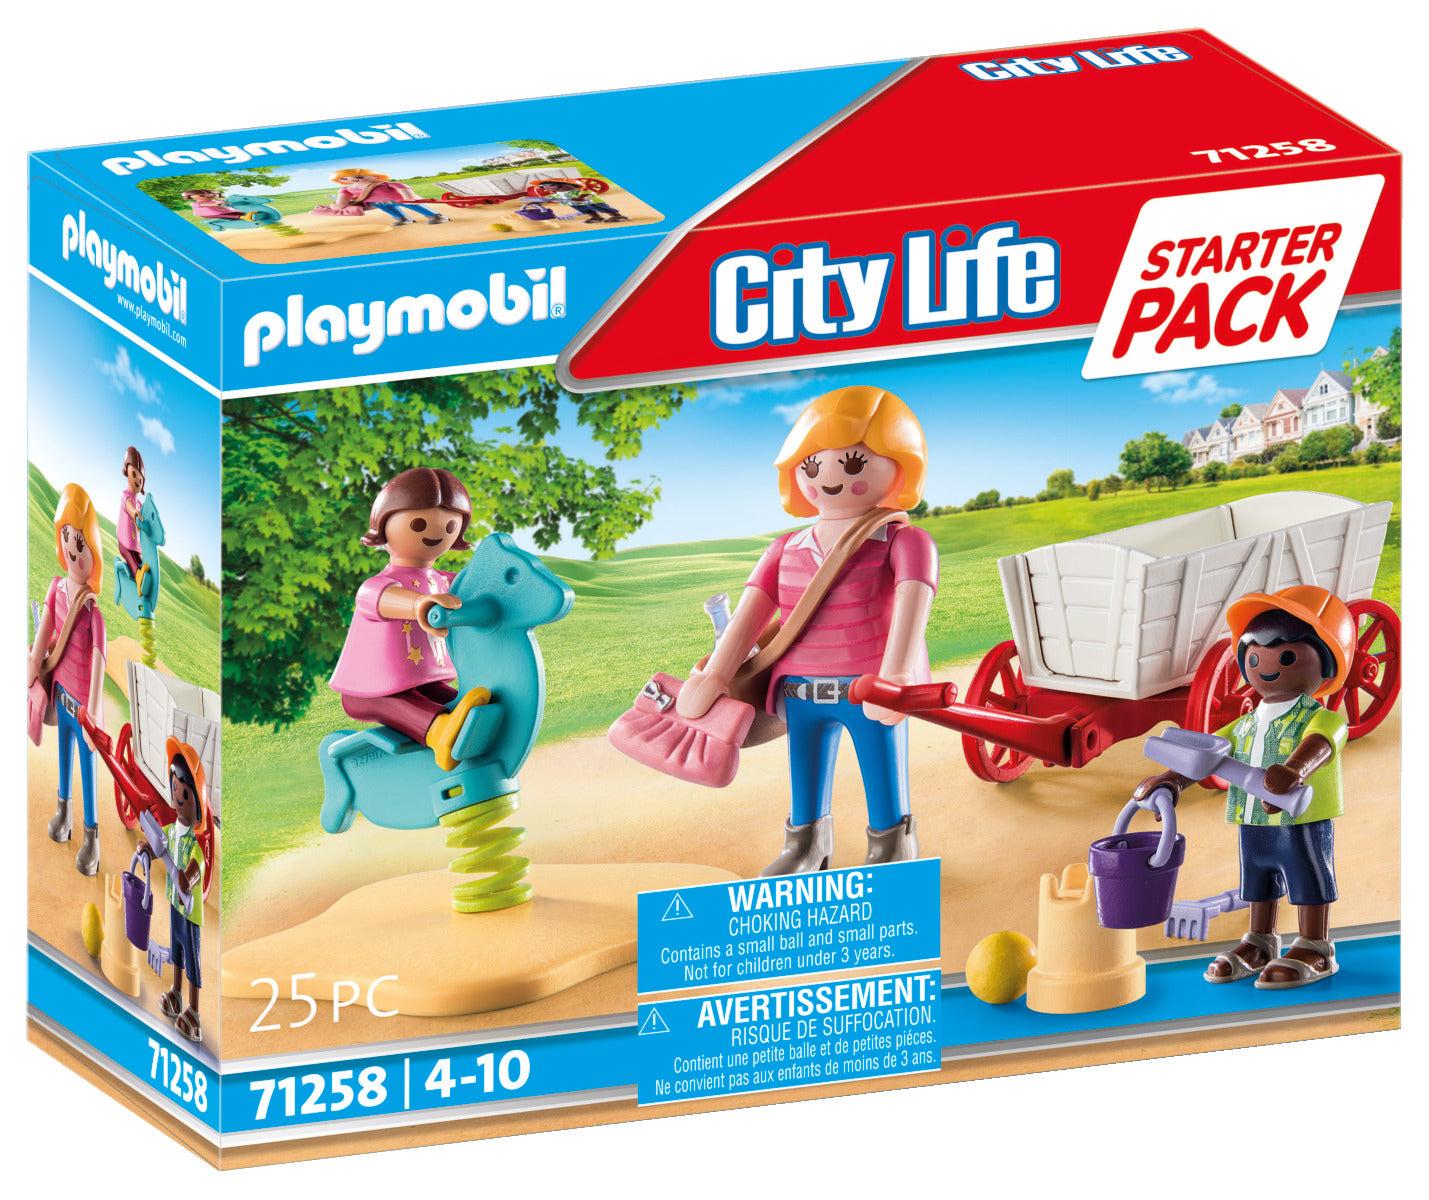 PLAYMOBIL City Life 70281 Pre-School Adventure Playground, for Children  Ages 4+